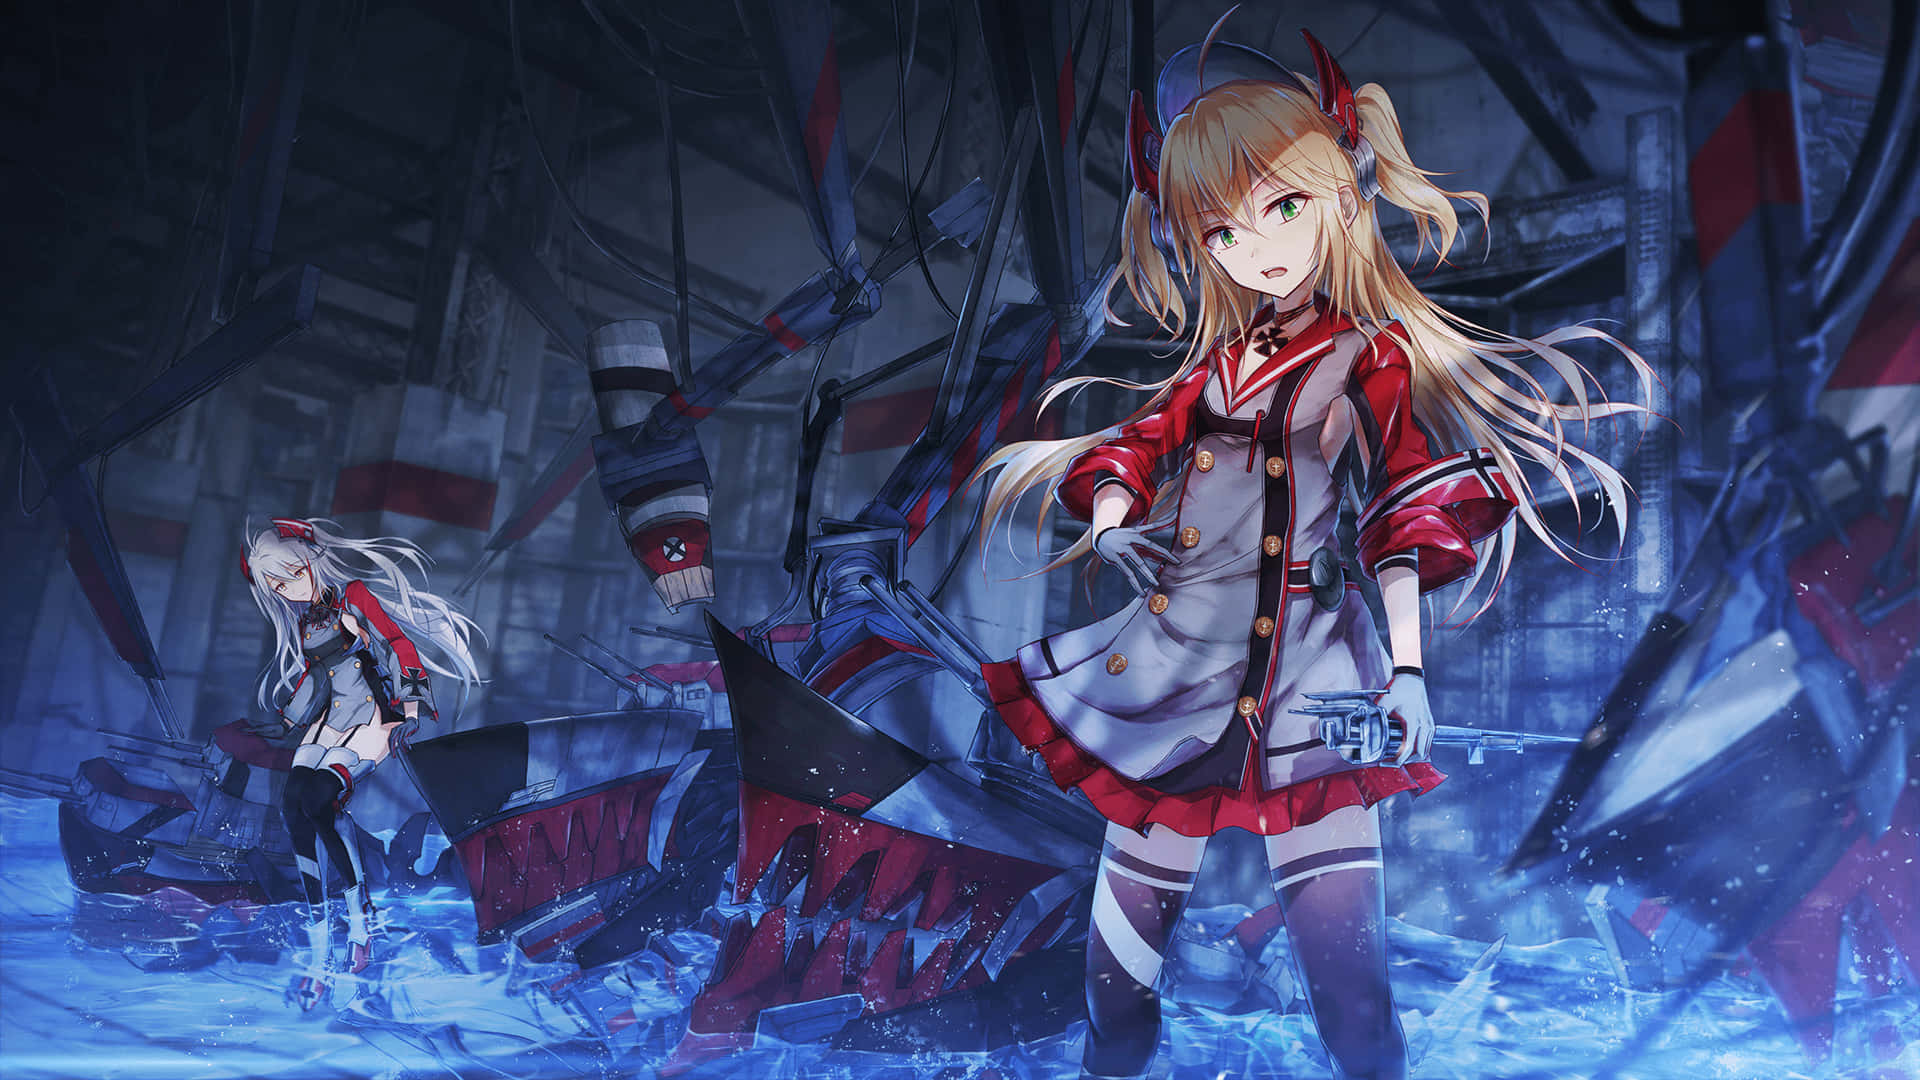 Splash into the Waves of Adventure with Azur Lane